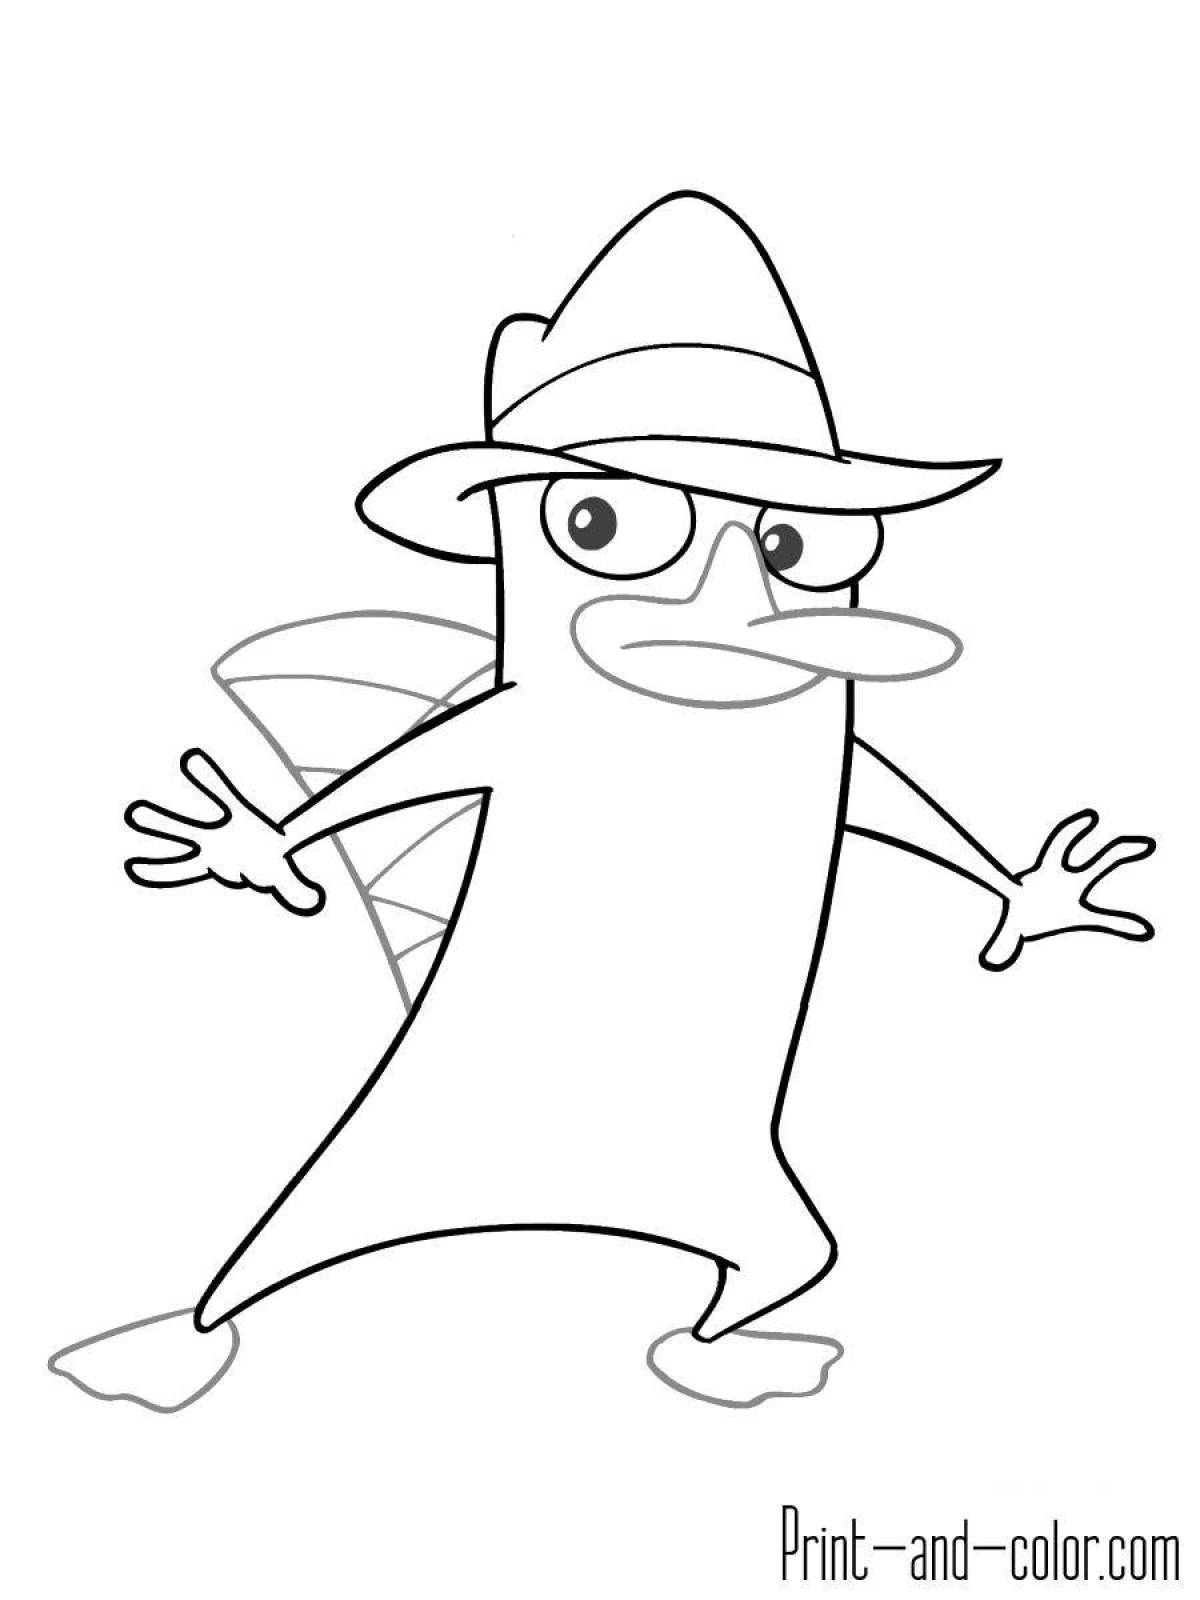 Coloring page perry the adorable platypus